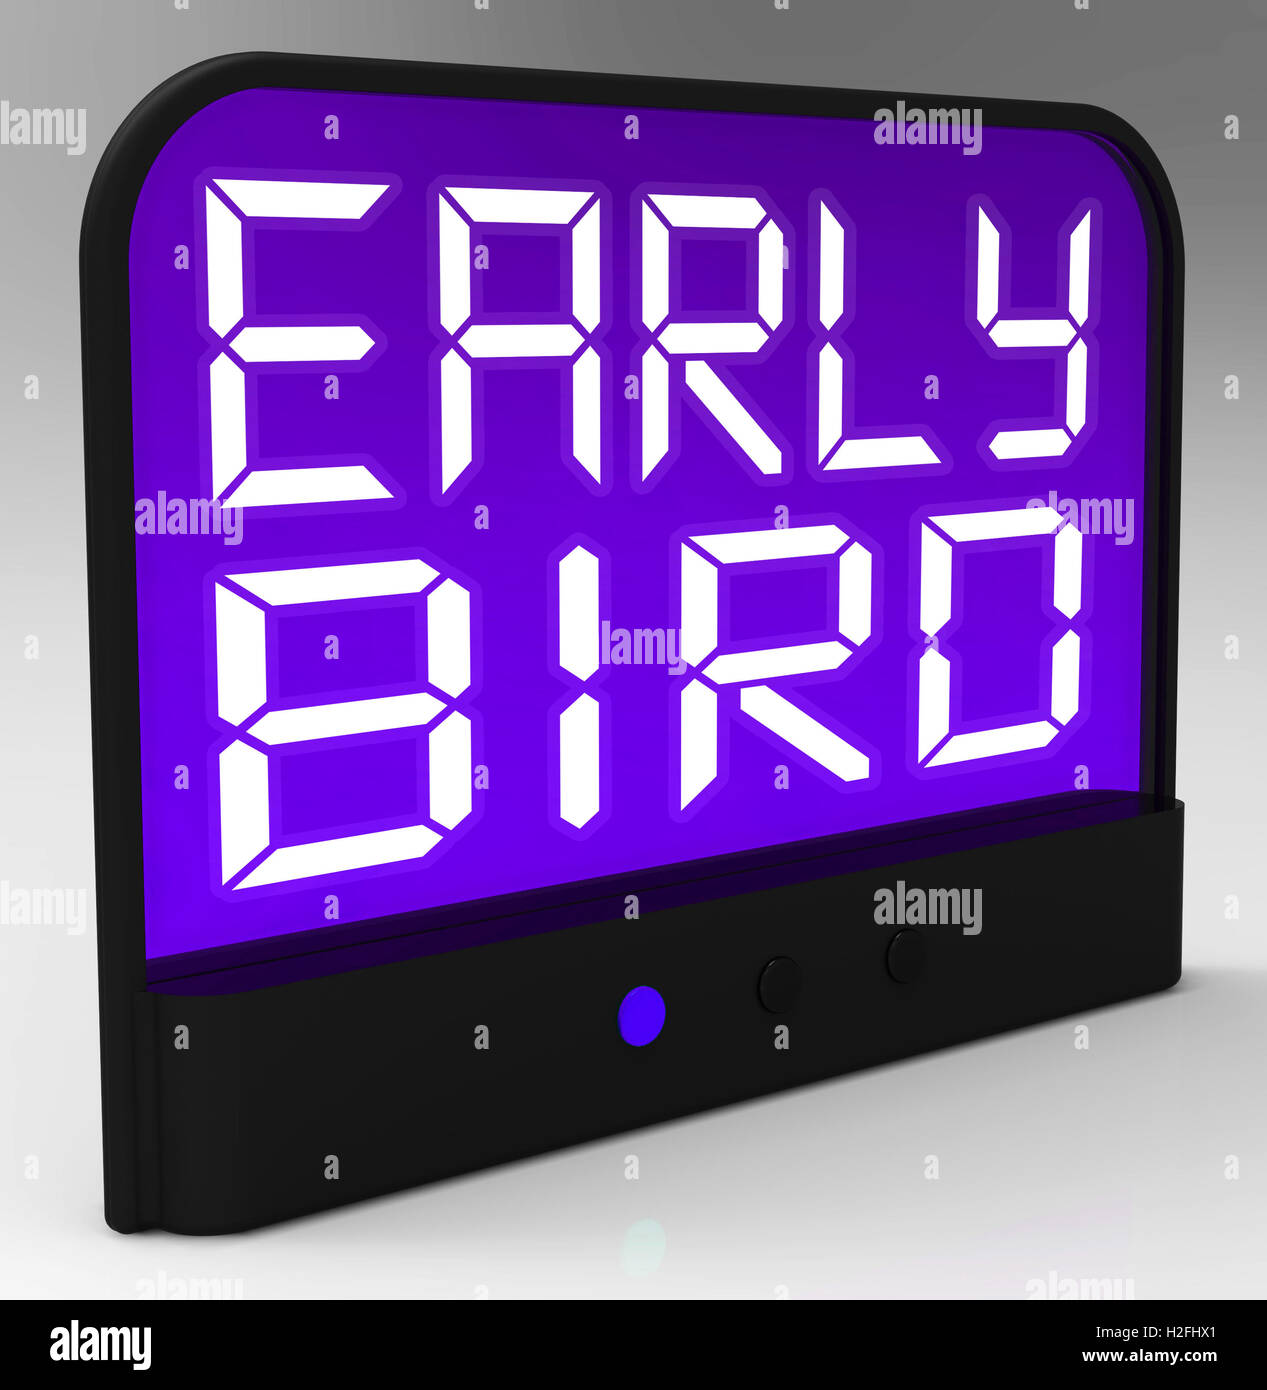 Early Bird Clock Shows Punctuality Or Ahead Of Schedule Stock Photo